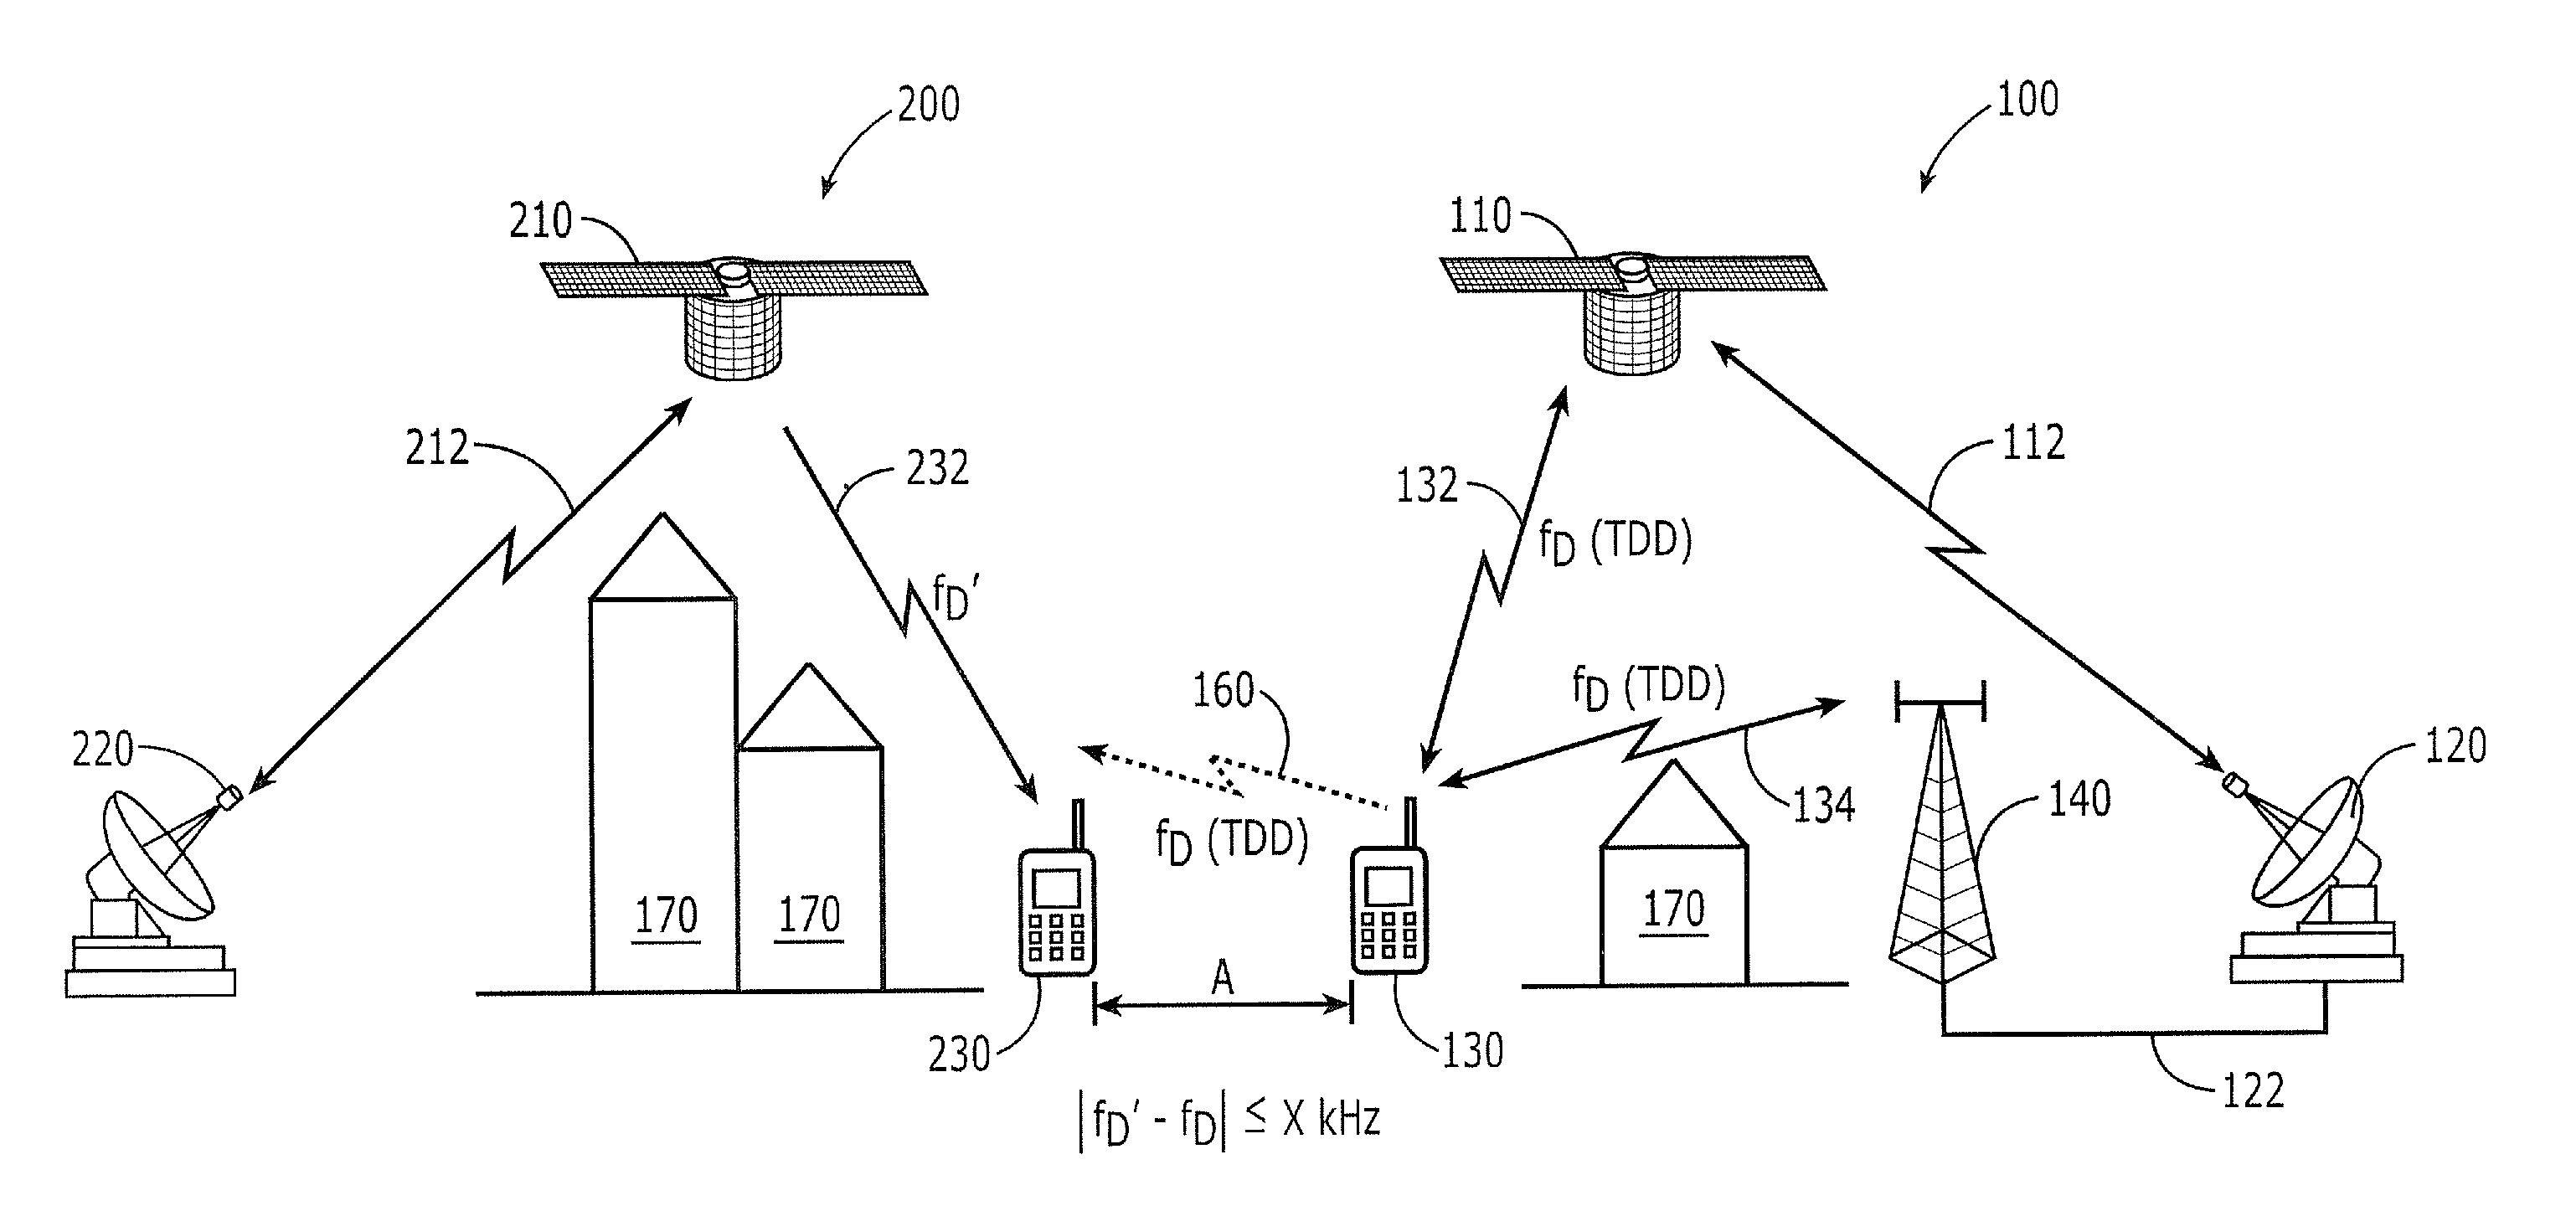 Systems and methods for controlling a level of interference to a wireless receiver responsive to an activity factor associated with a wireless transmitter